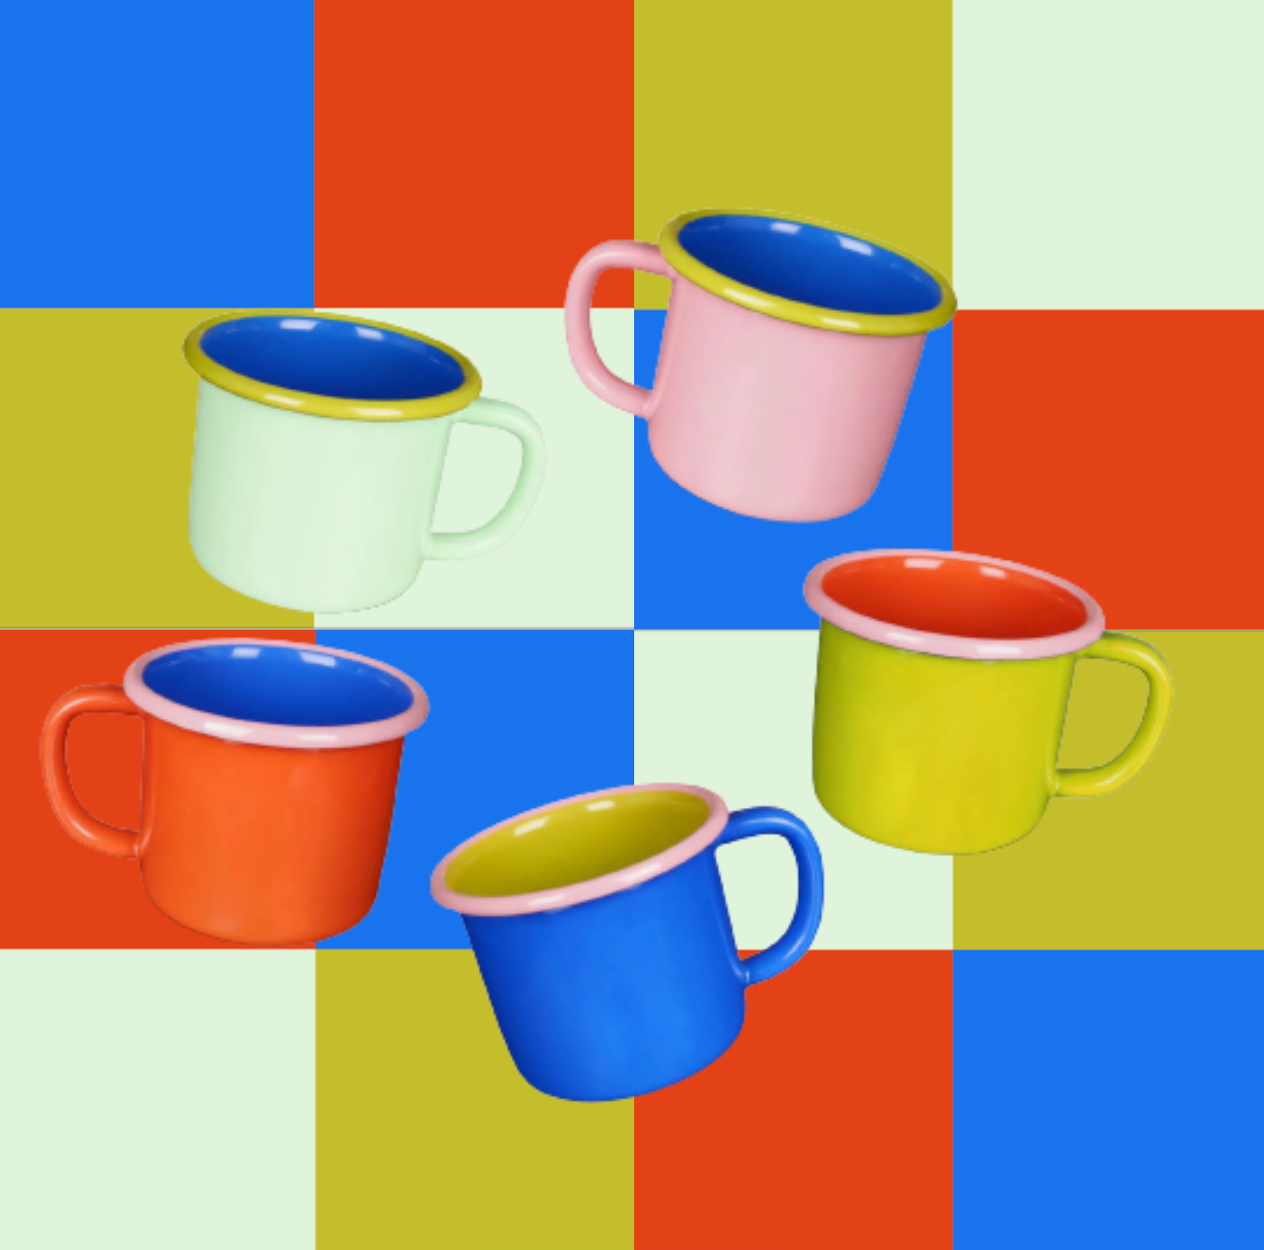 Colorama 12oz Mugs -- Assorted Color Combos